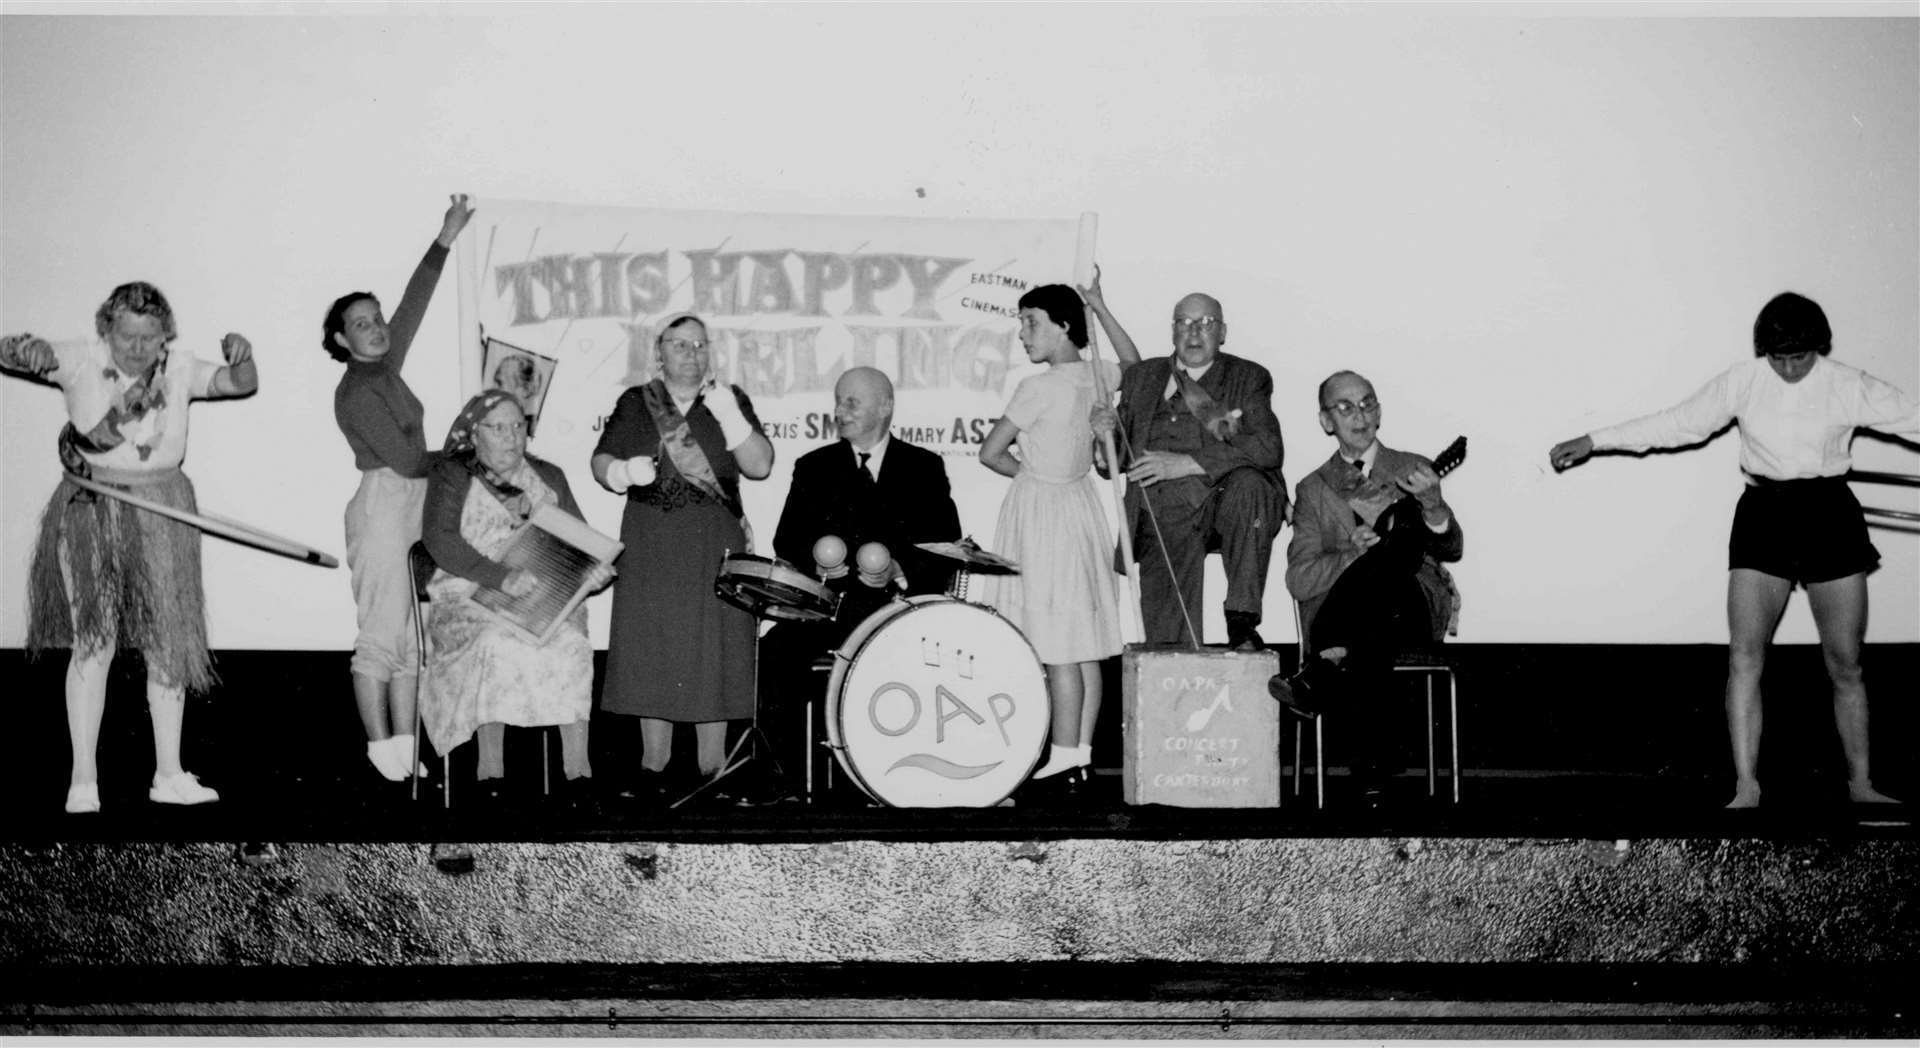 The hula hoop craze got under way in Canterbury in October 1958 with a demonstration at the Odeon cinema in The Friars (now the Marlowe Theatre). Girls swayed hoops round their bodies to the music of the 20-piece Old Age Pensioner's skiffle group imported from America